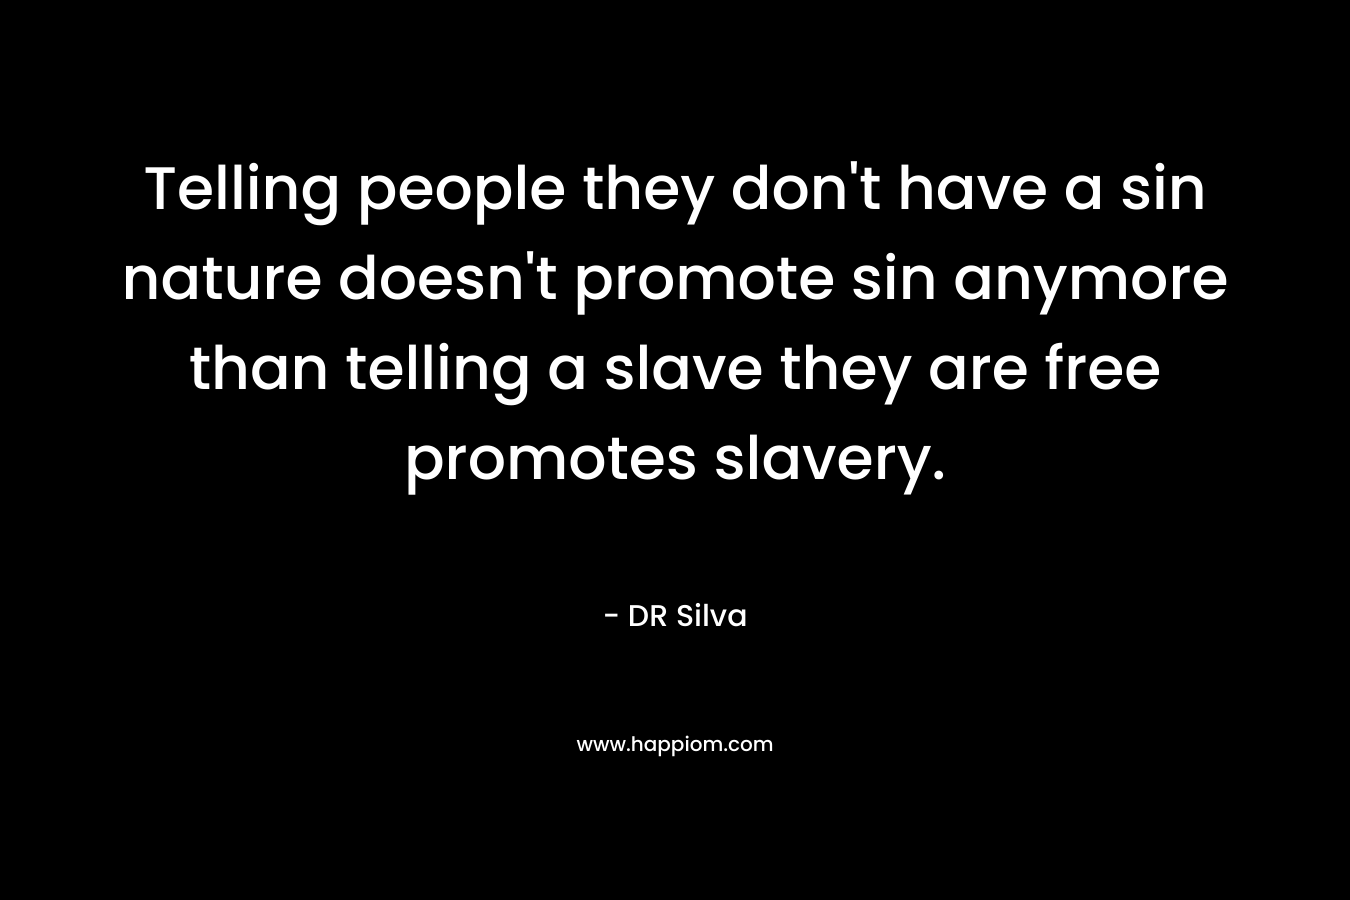 Telling people they don’t have a sin nature doesn’t promote sin anymore than telling a slave they are free promotes slavery. – DR Silva